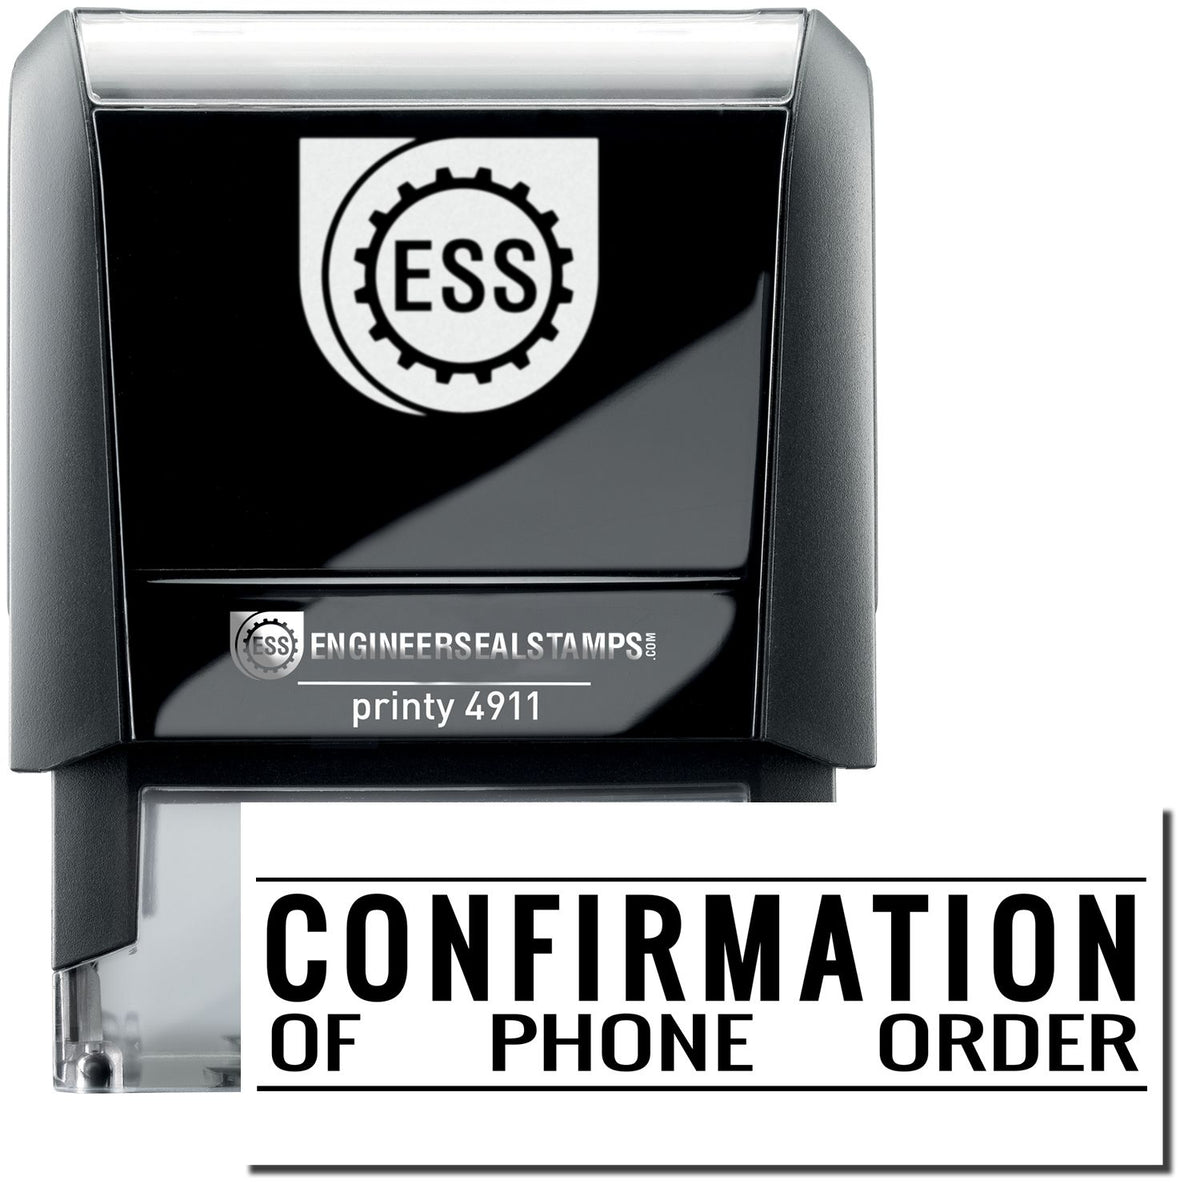 A self-inking stamp with a stamped image showing how the text &quot;CONFIRMATION OF PHONE ORDER&quot; (&quot;CONFIRMATION&quot; in a large font and &quot;OF PHONE ORDER&quot; in a small font) is displayed after stamping.